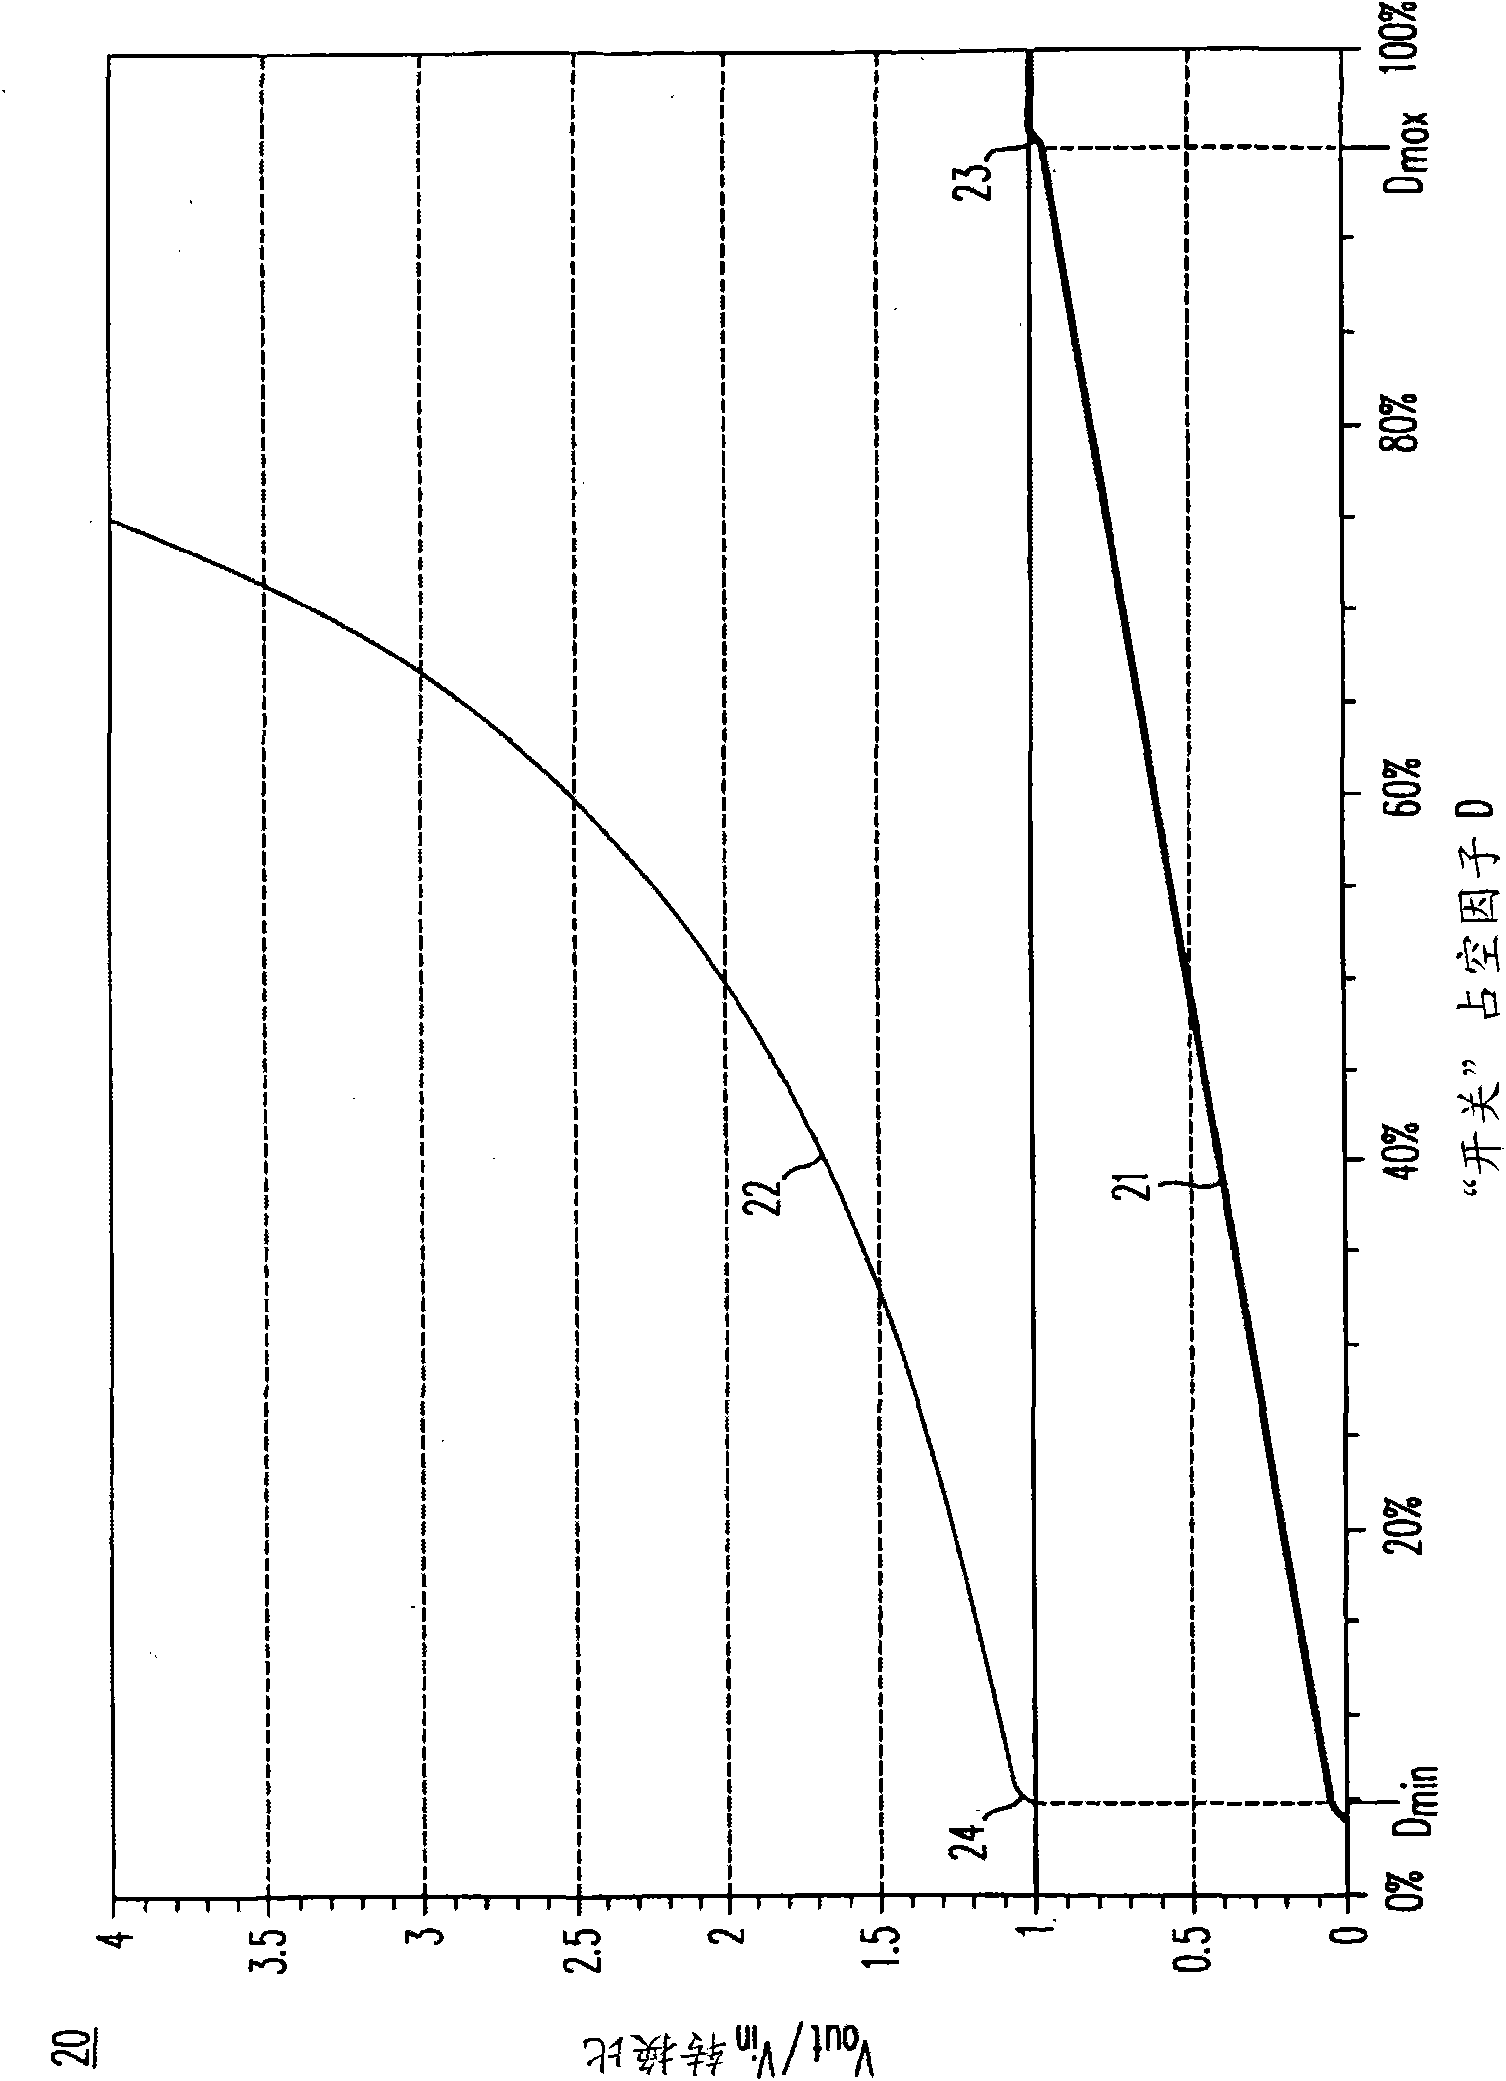 High-efficiency dc/dc voltage converter including down inductive switching pre-regulator and capacitive switching post-converter